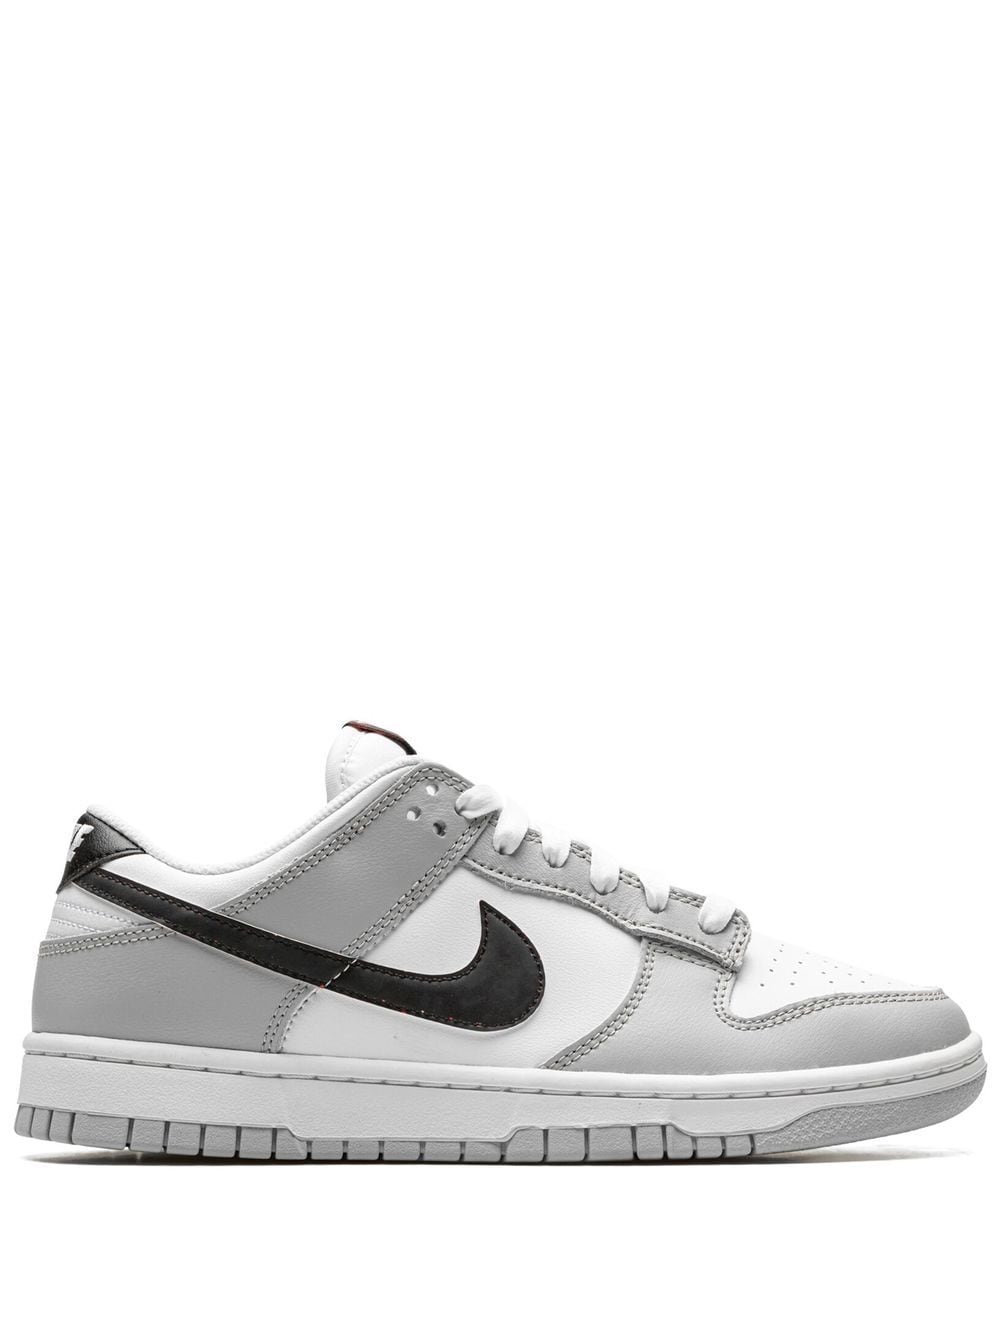 Nike Dunk Low SE "Lottery Pack - Grey" sneakers von Nike